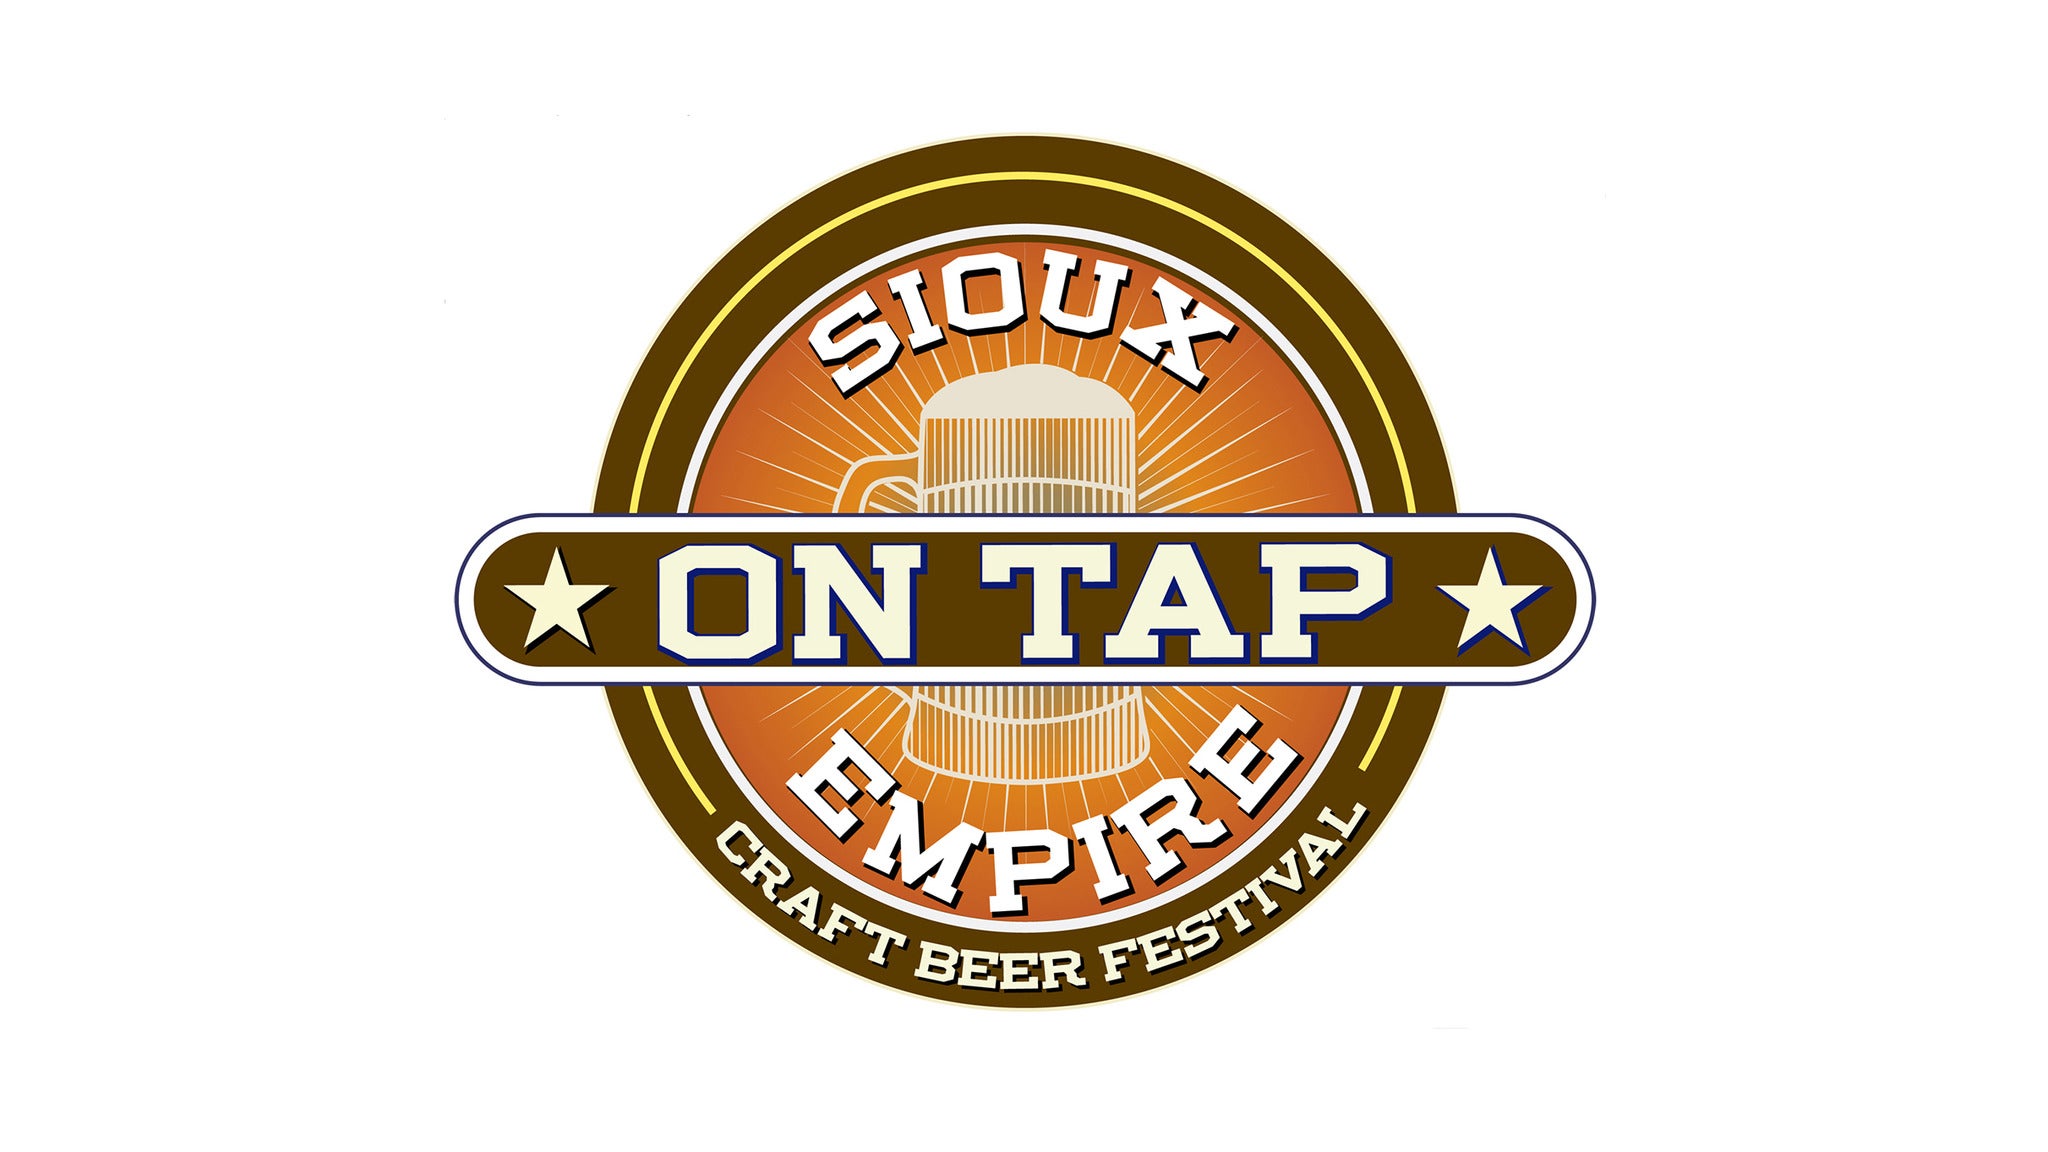 Sioux Empire On Tap in Sioux Falls promo photo for Tier 3 Pricing presale offer code